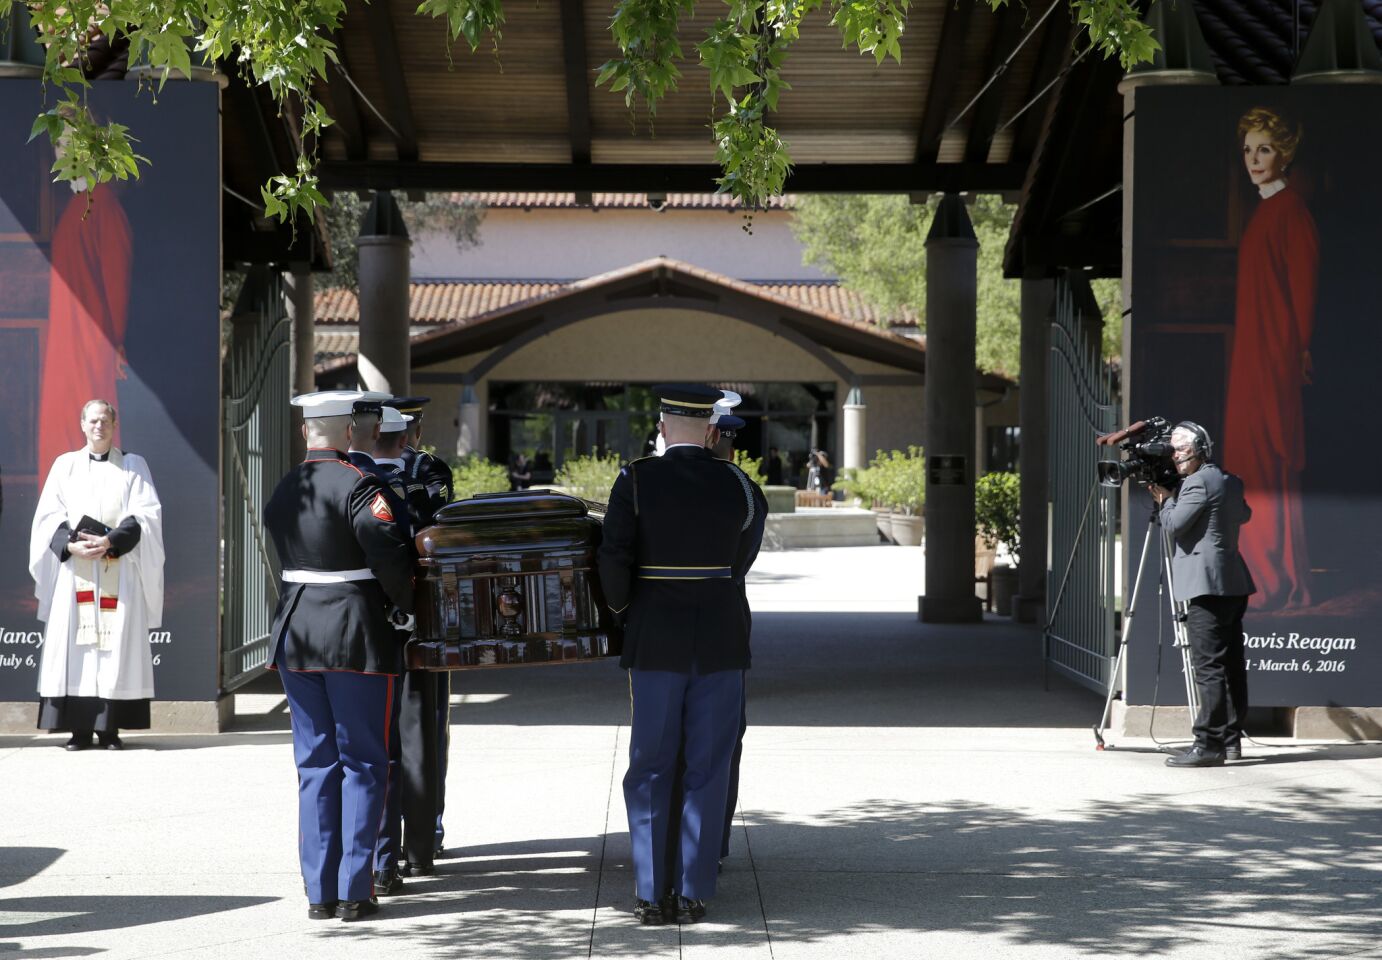 The casket carrying Nancy Reagan arrives at the Ronald Reagan Presidential Library in Simi Valley, Calif.